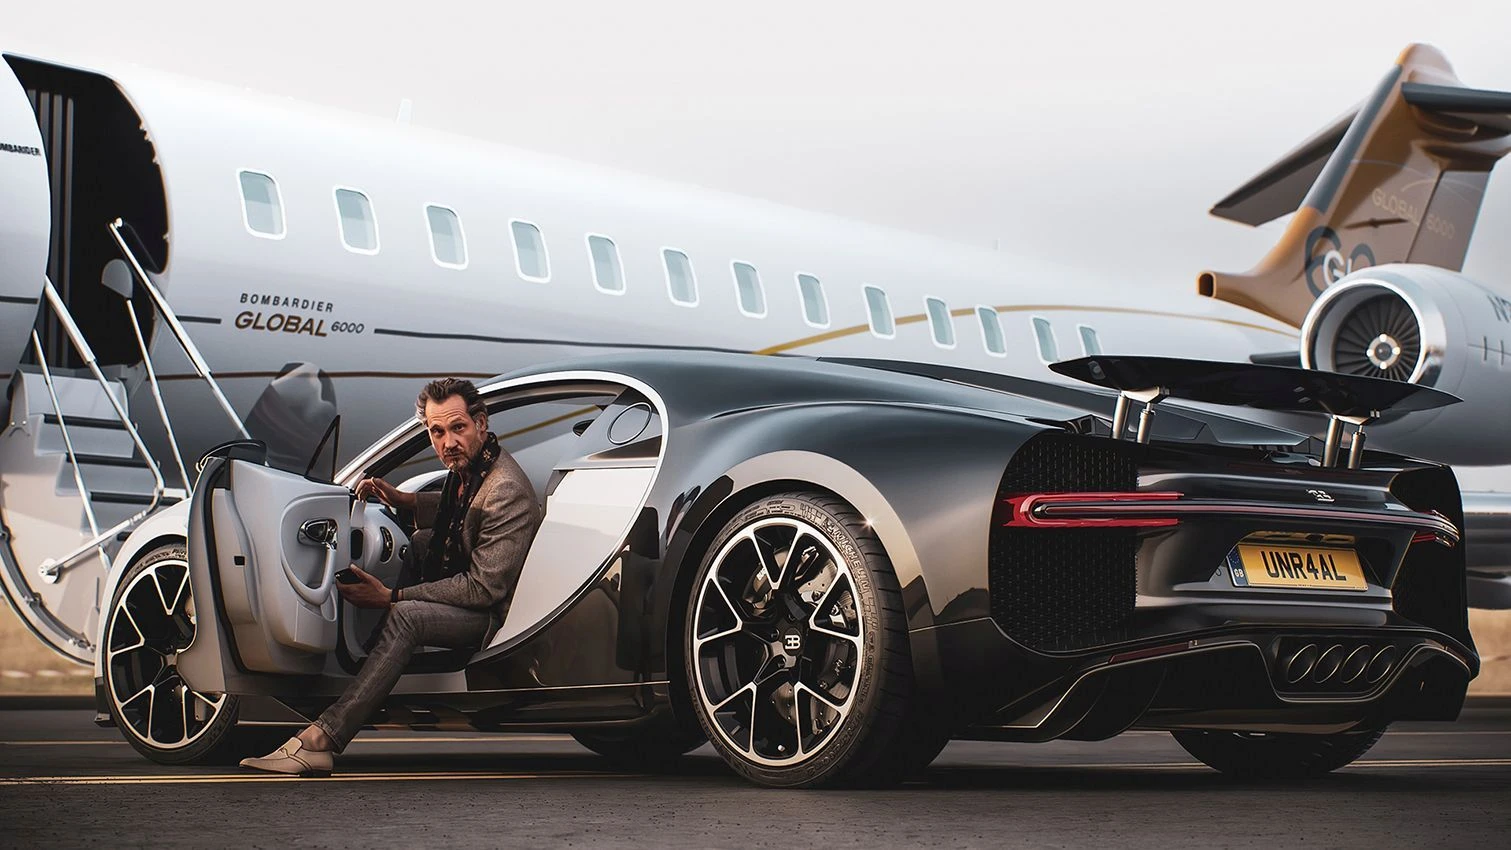 Bugatti Chiron by David Baylis door open and a men is getting out